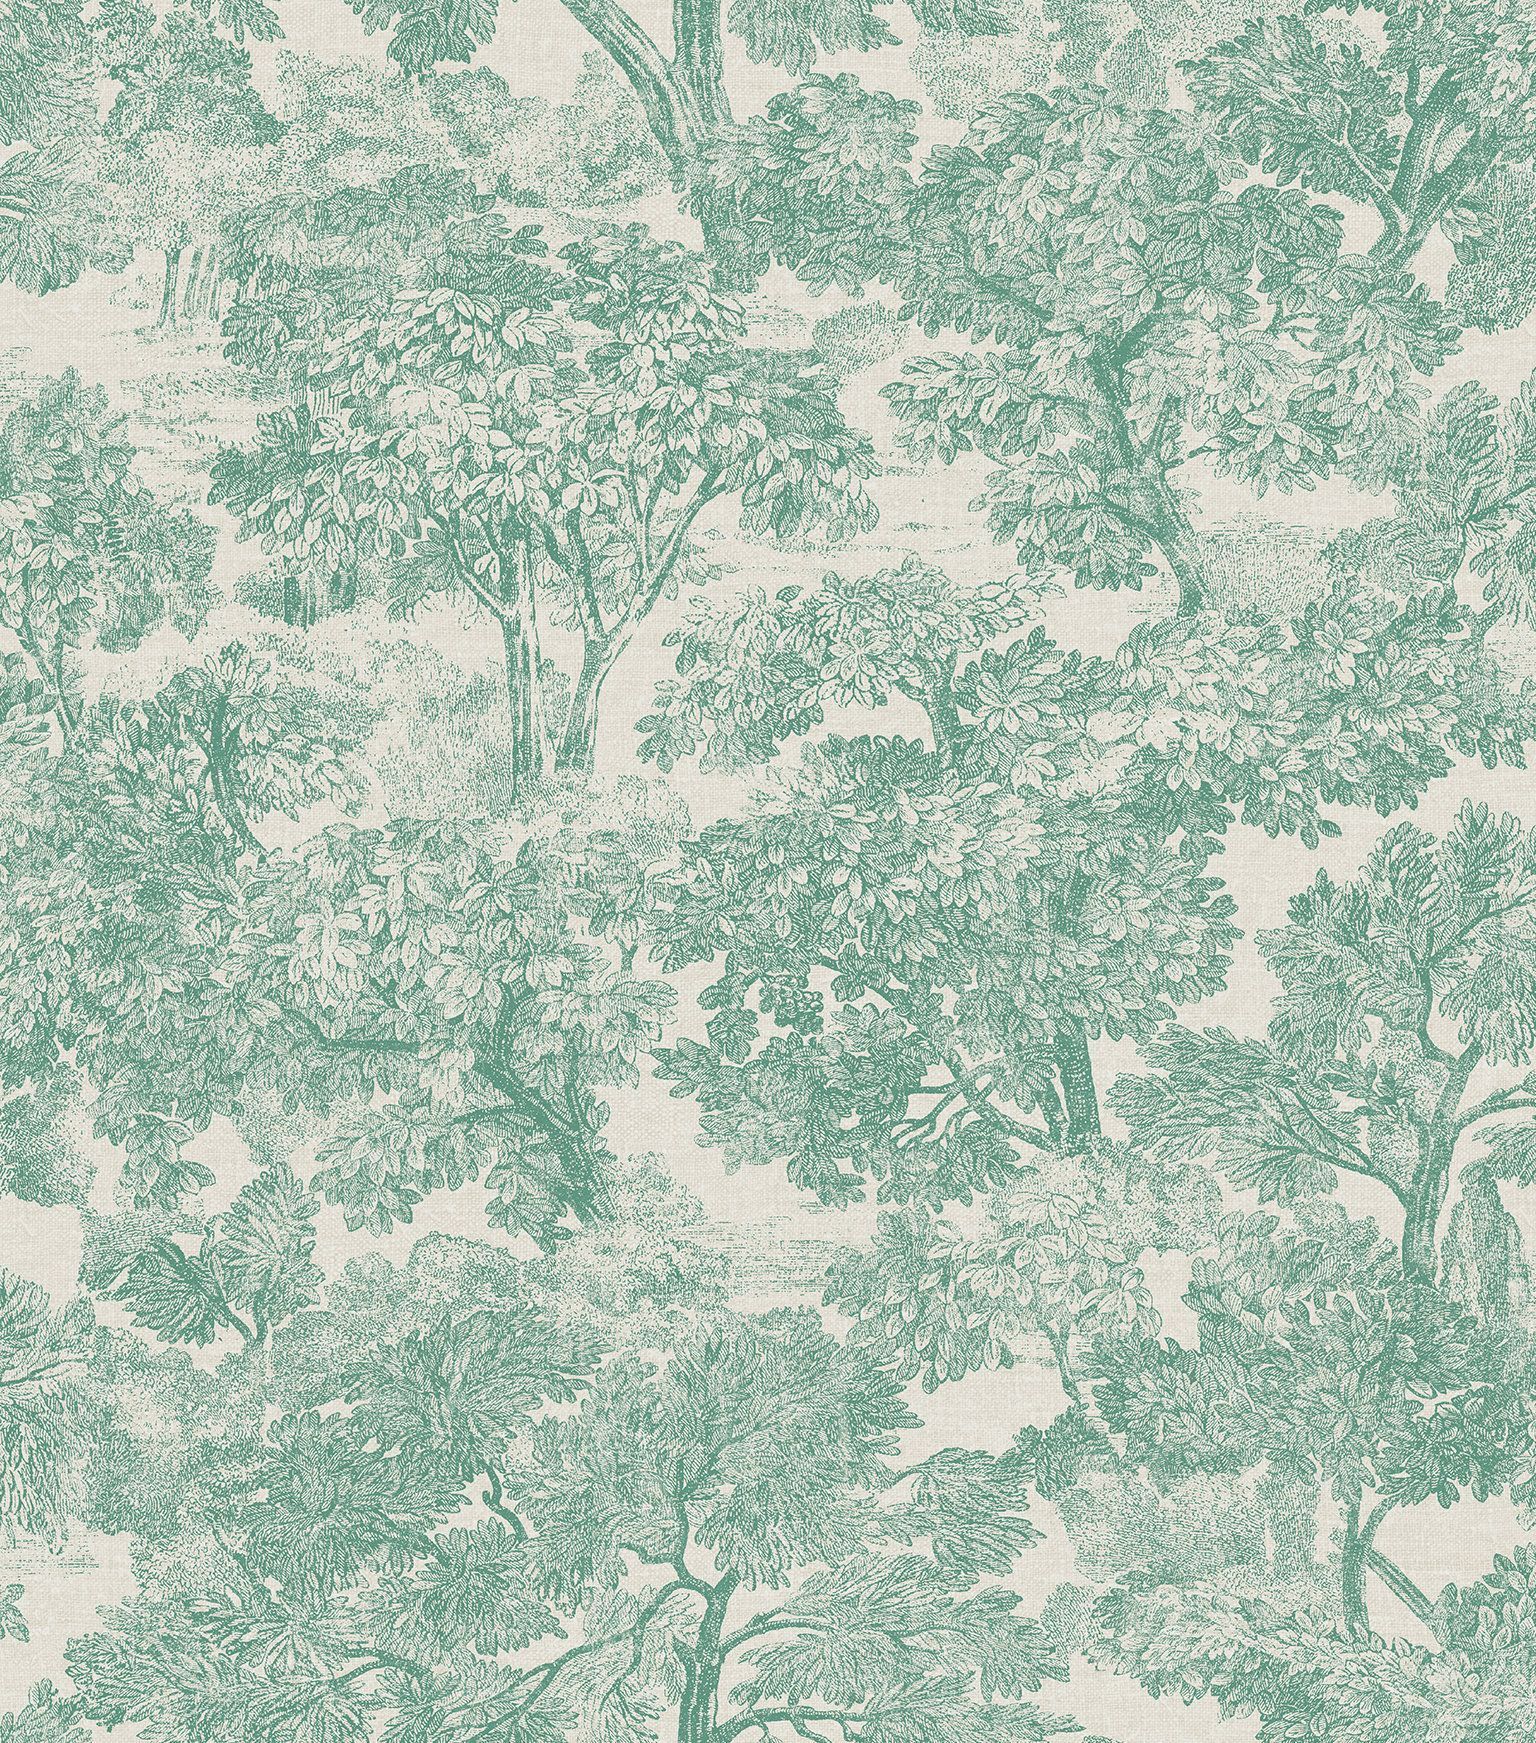 The Archive Collection is a beautiful collection of wallpapers inspired by designs from 18th and 19th century textiles and botanical illustrations. Archive toile de jouy is a traditional toile de jouy design with a soft green background. - Light green